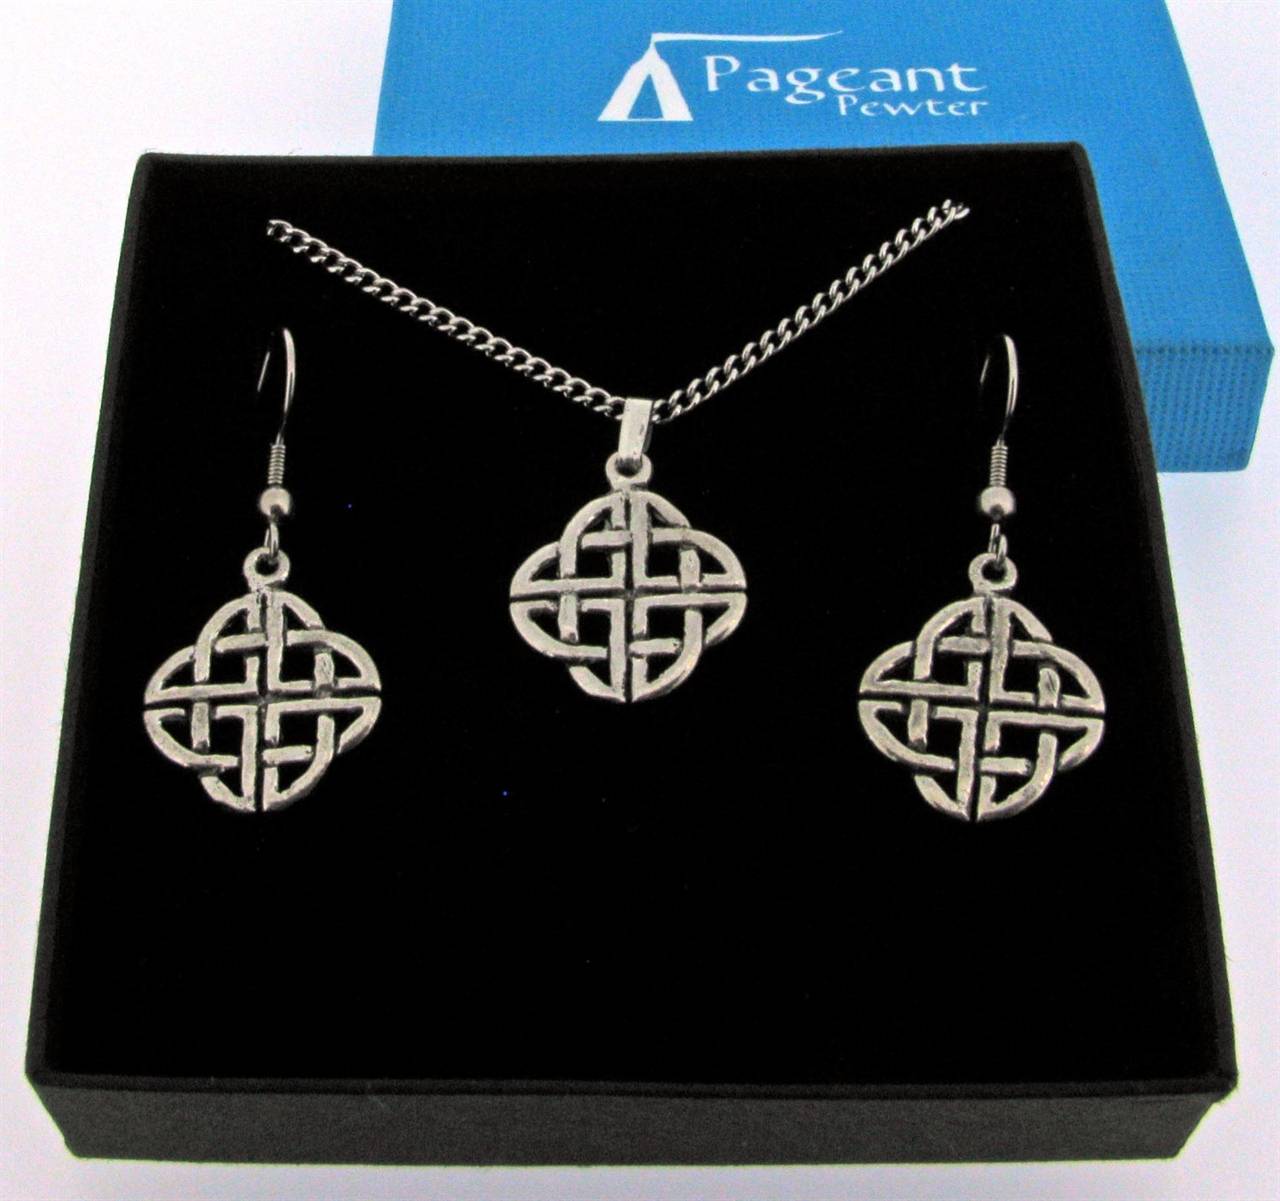 Celtic Jewellery Gift Set - high quality pewter gifts from Pageant Pewter